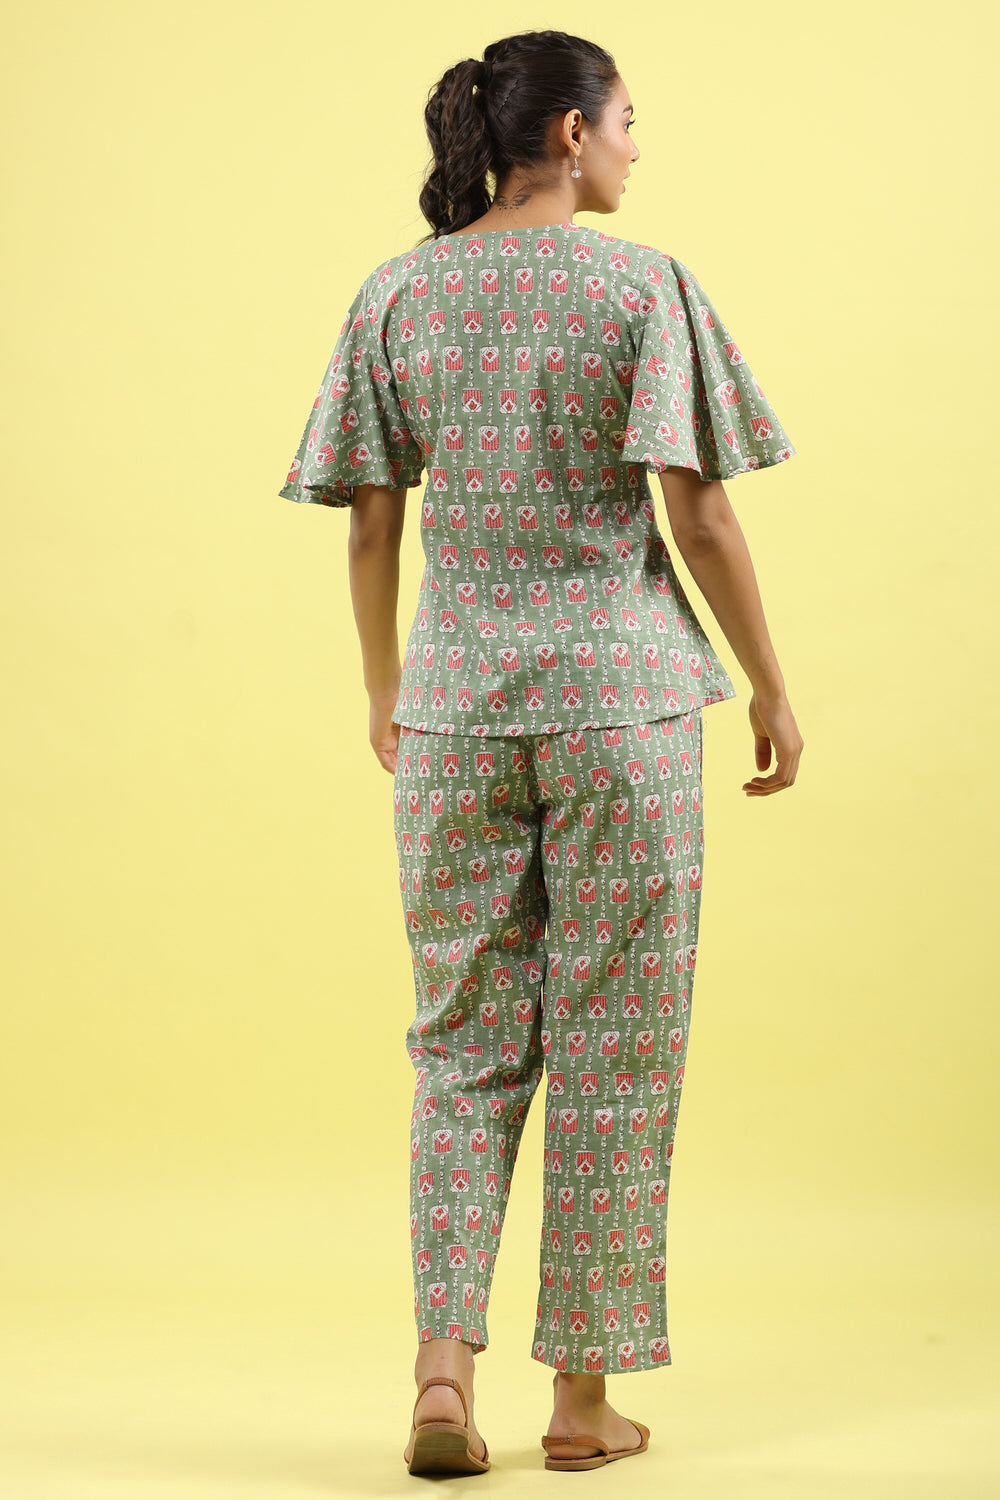 Geometrical Print on Green Tie Up Co-ord Set